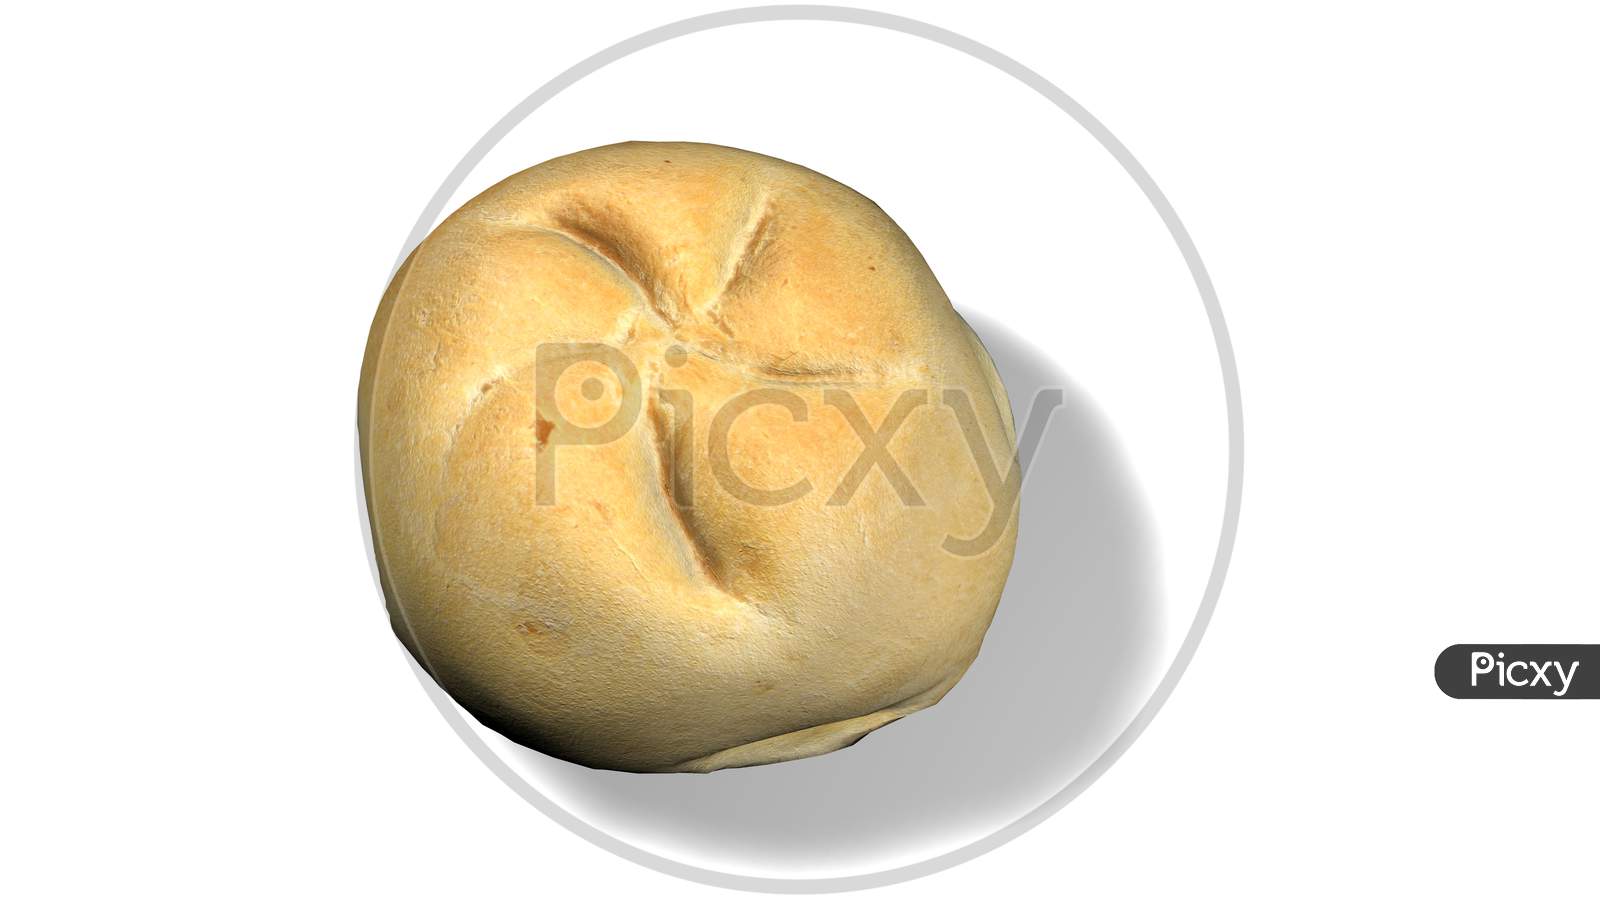 Homemade Bread Isolated On A White Background.